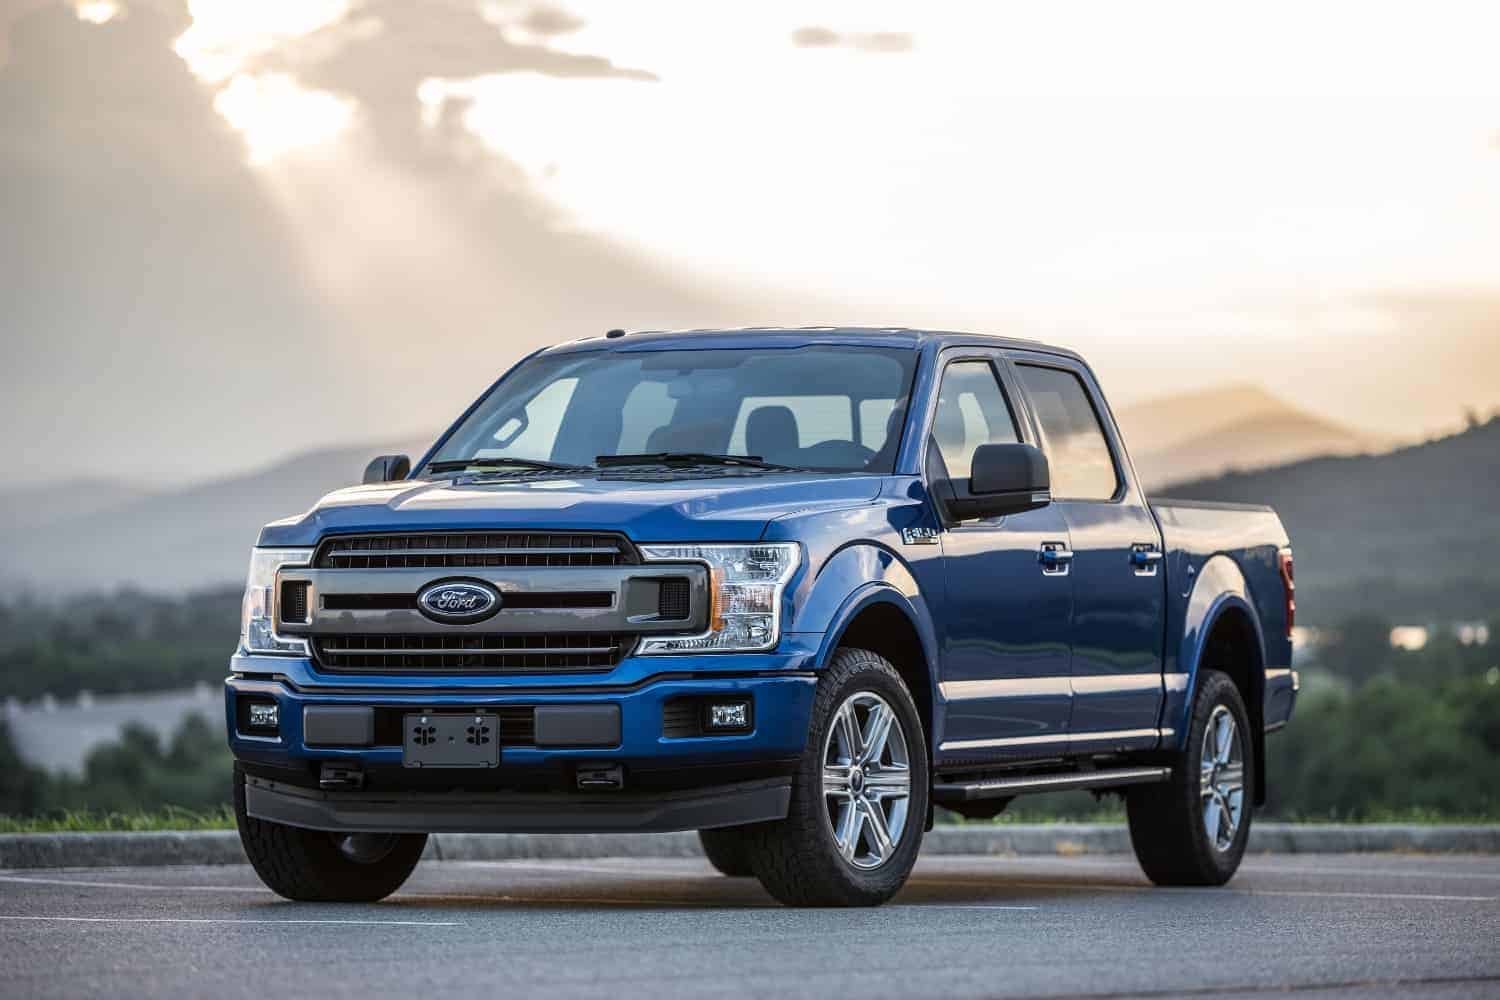 With Ford’s electric F-150 pickup, the EV transition shifts into high gear